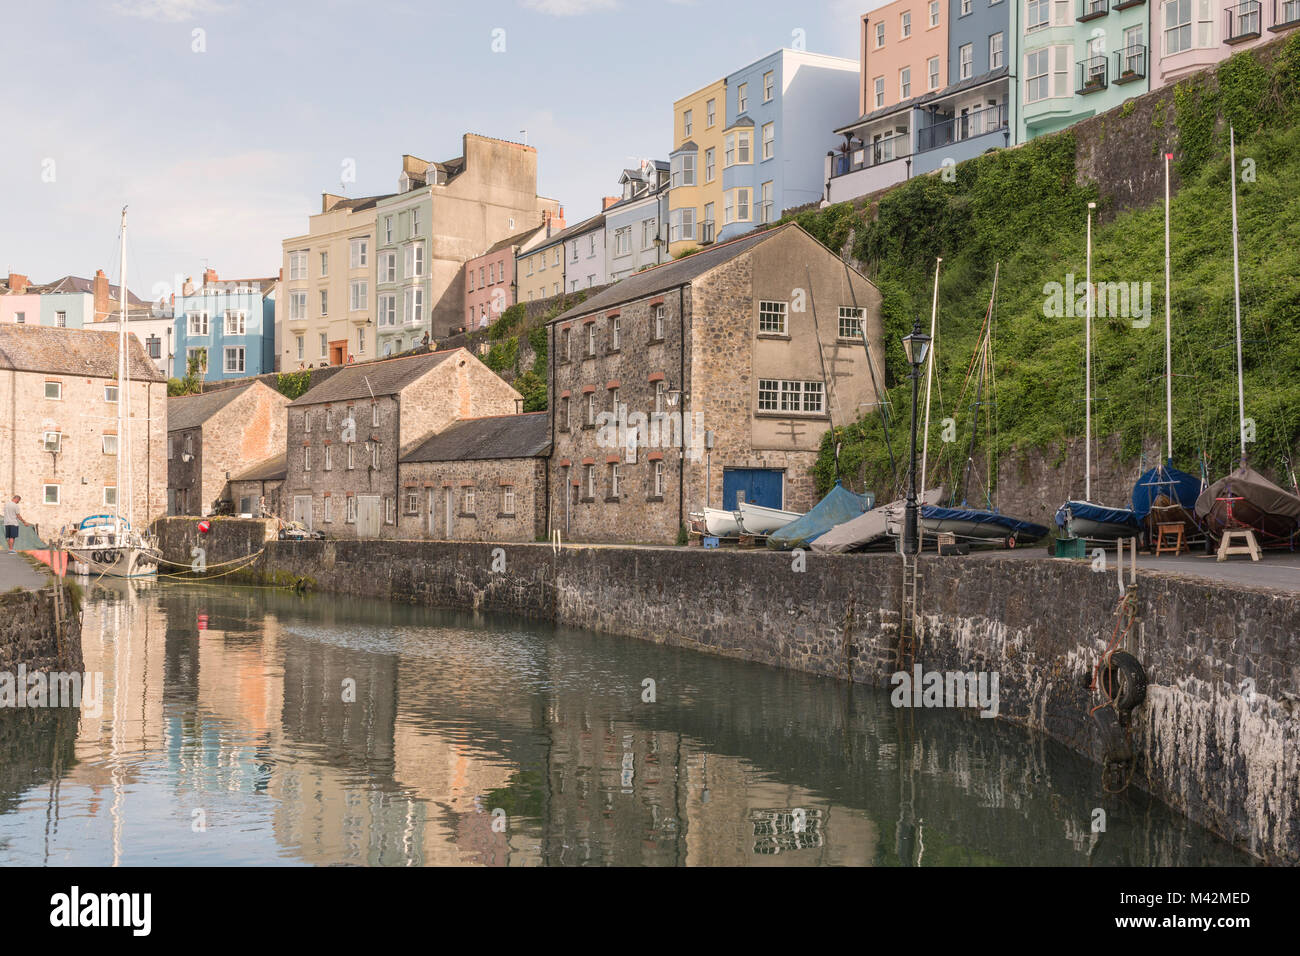 An image of Tenby quayside and the surrounding pastel-coloured houses which overlook, shot in evening light, Tenby, Pembrokeshire, South Wales. Stock Photo